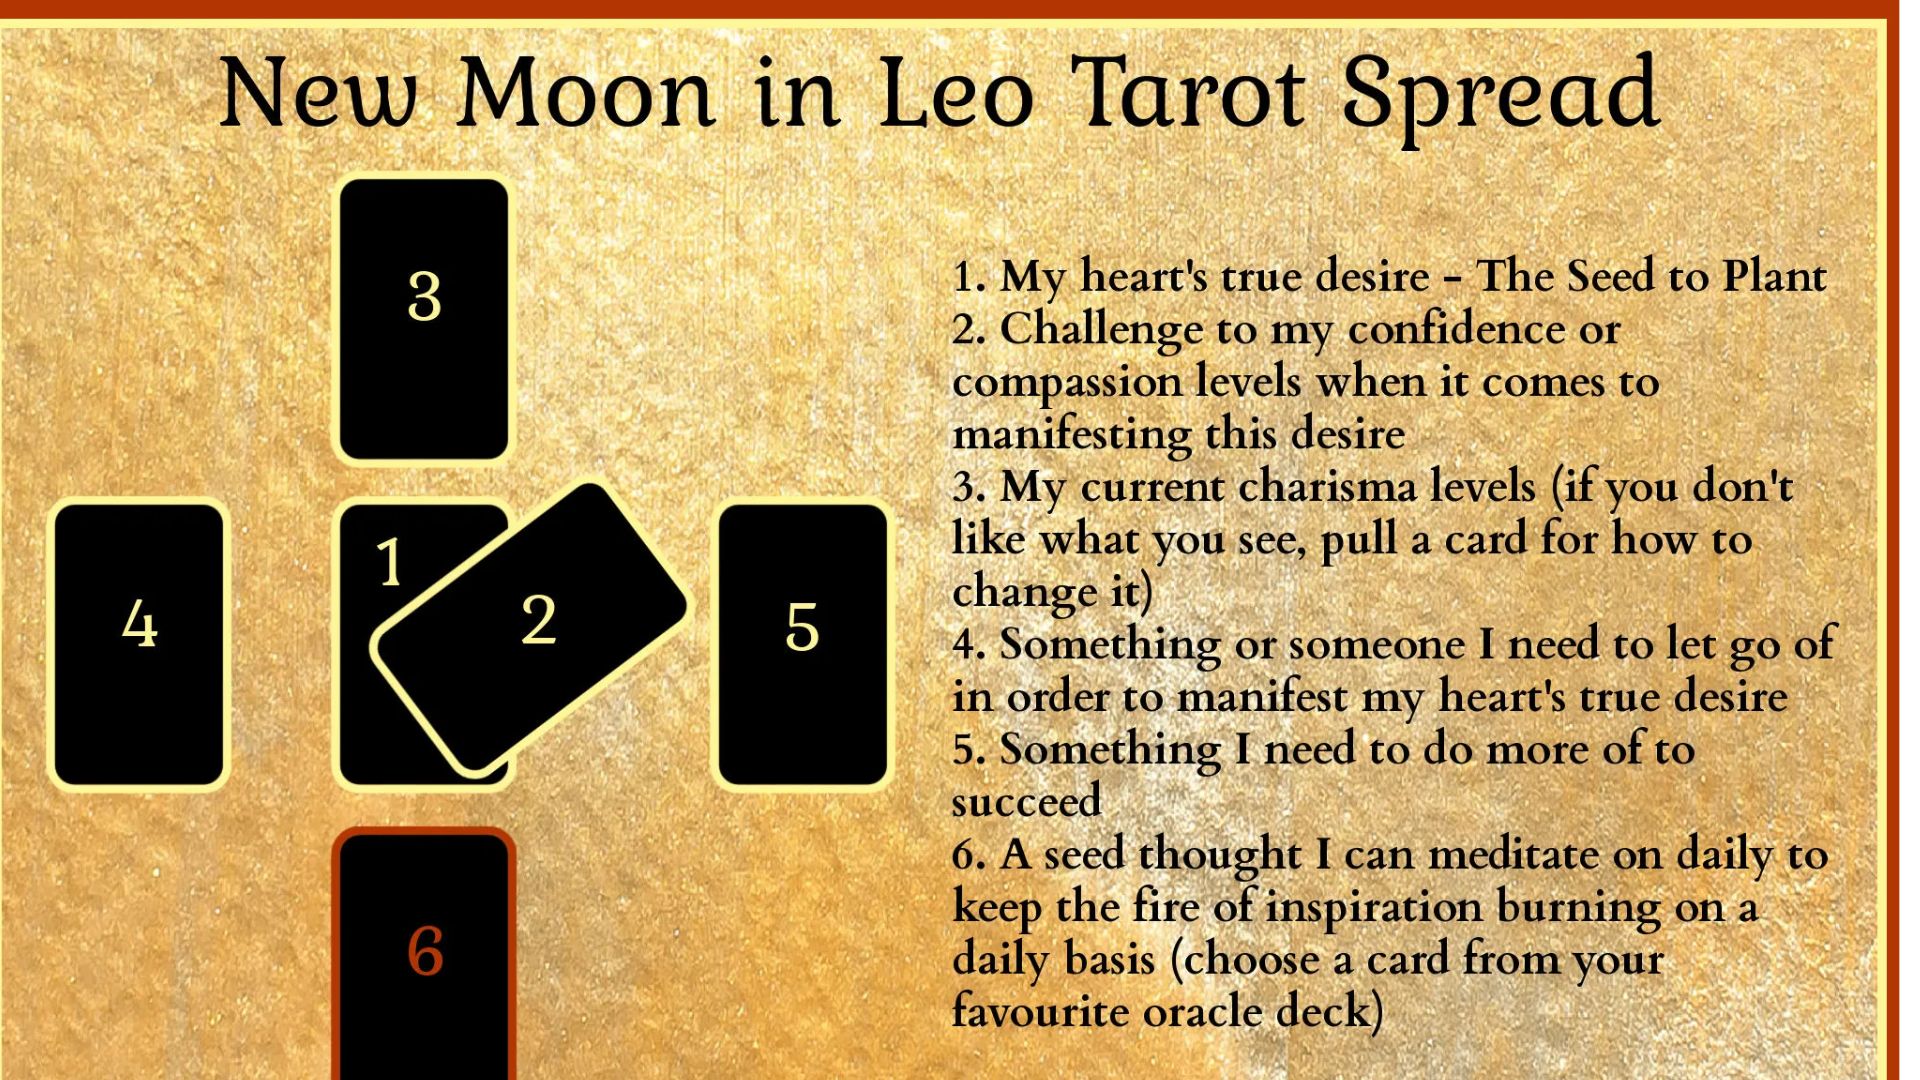 New Moon Tarot Spread - Set Your Intentions Right